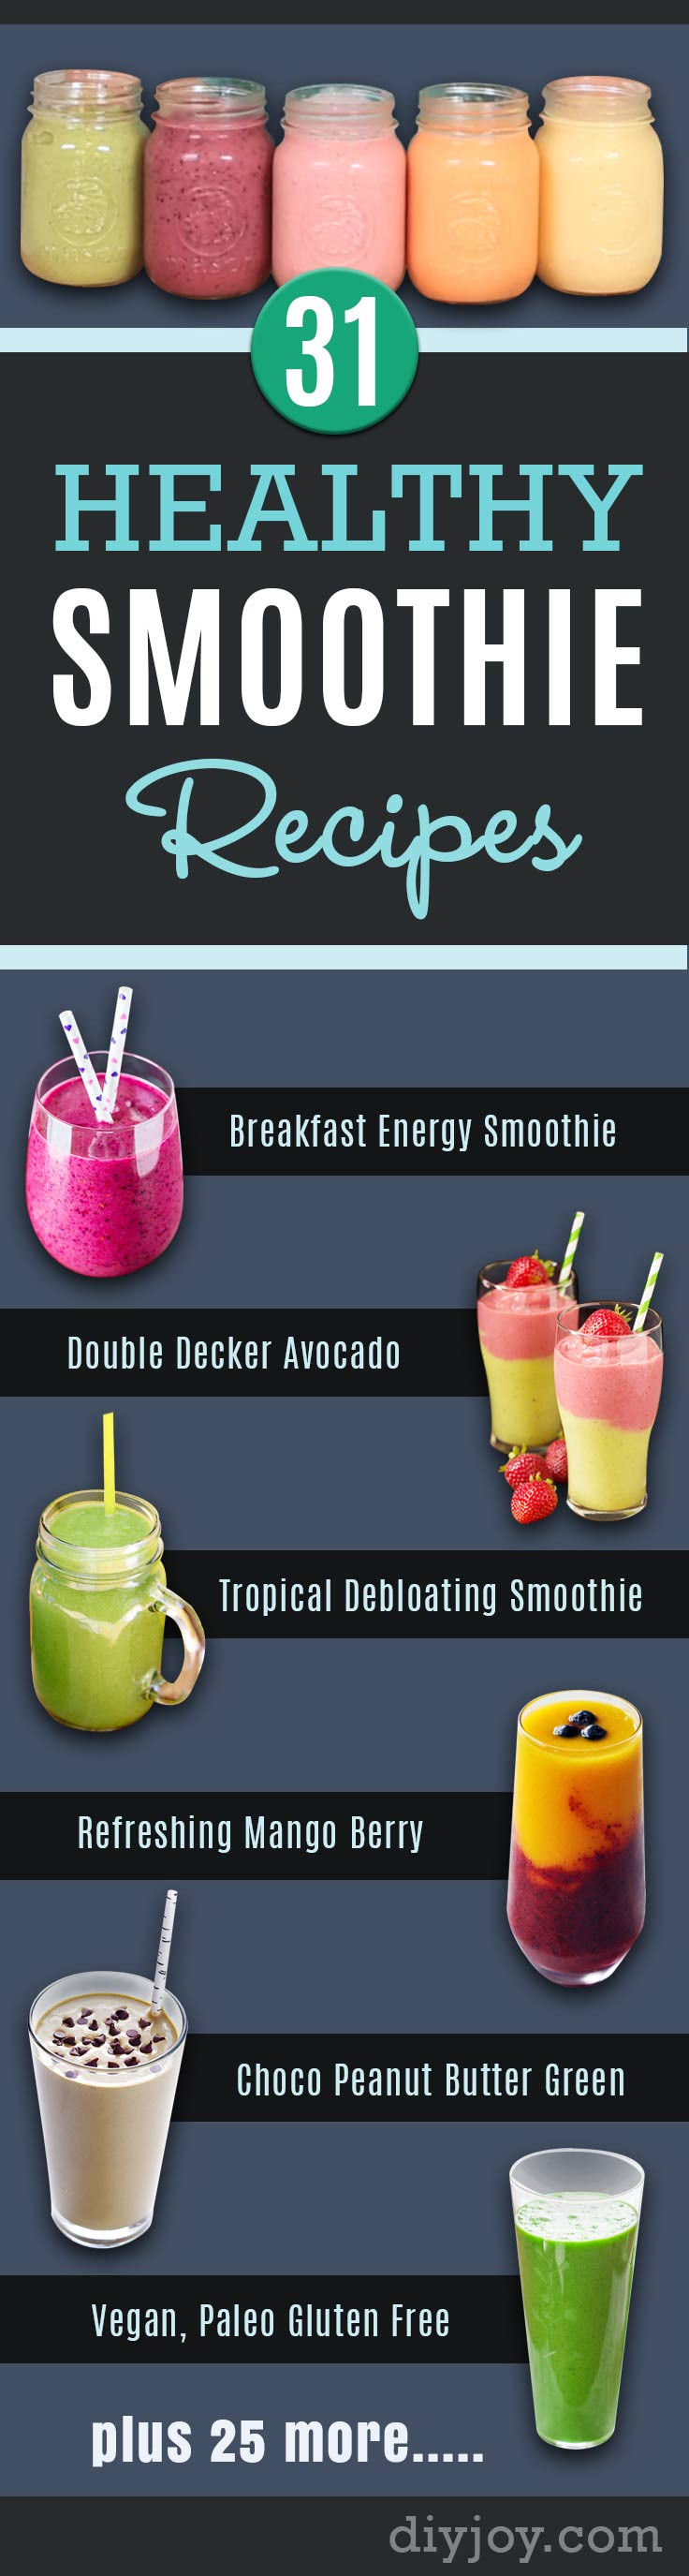 Healthy Smoothies For Dinner
 31 Healthy Smoothie Recipes